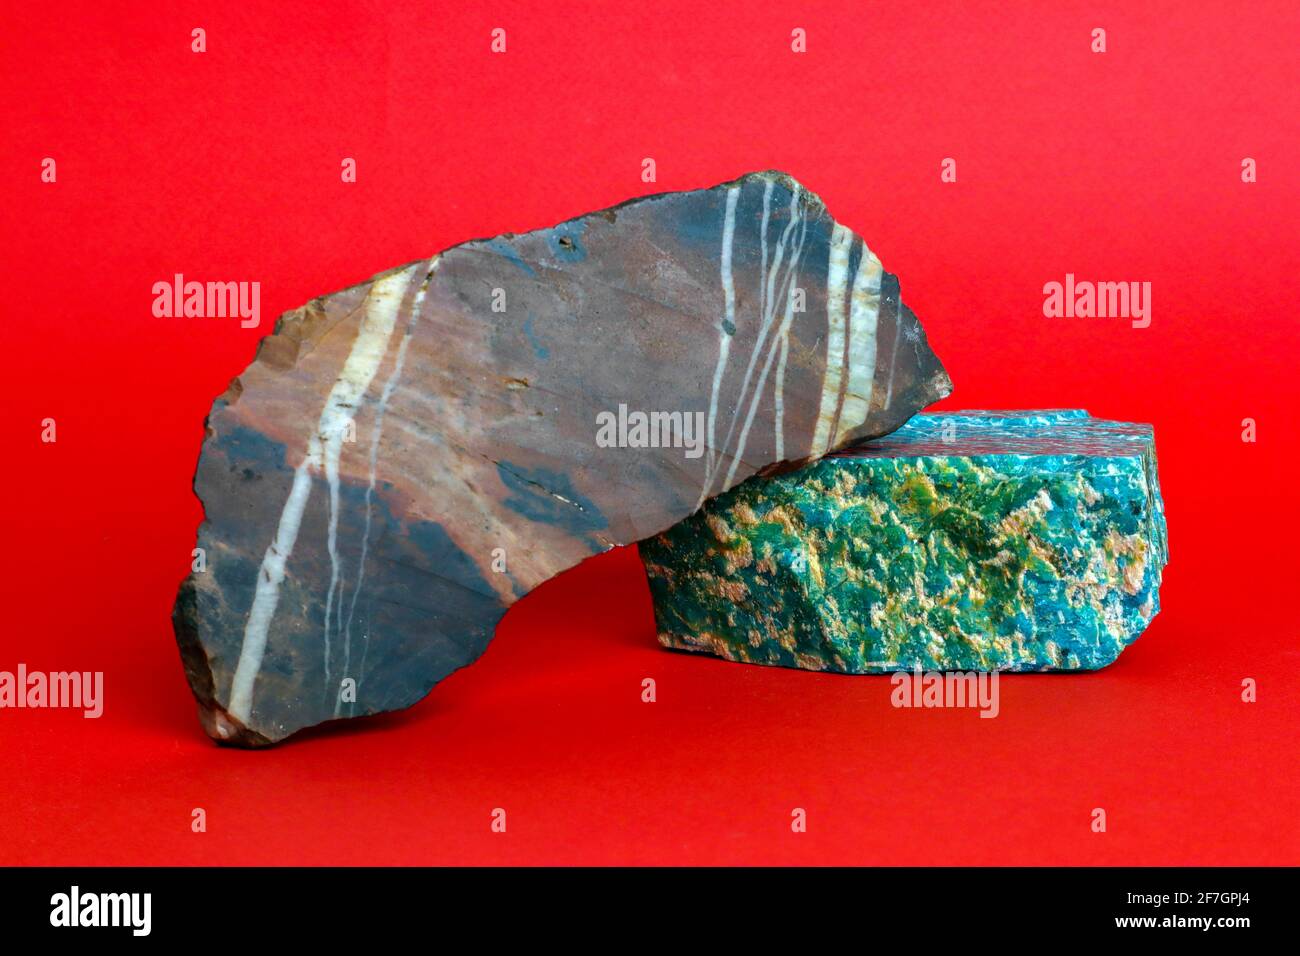 Two pieces of natural raw minerals, amazonite and jasper, against bright red background Stock Photo